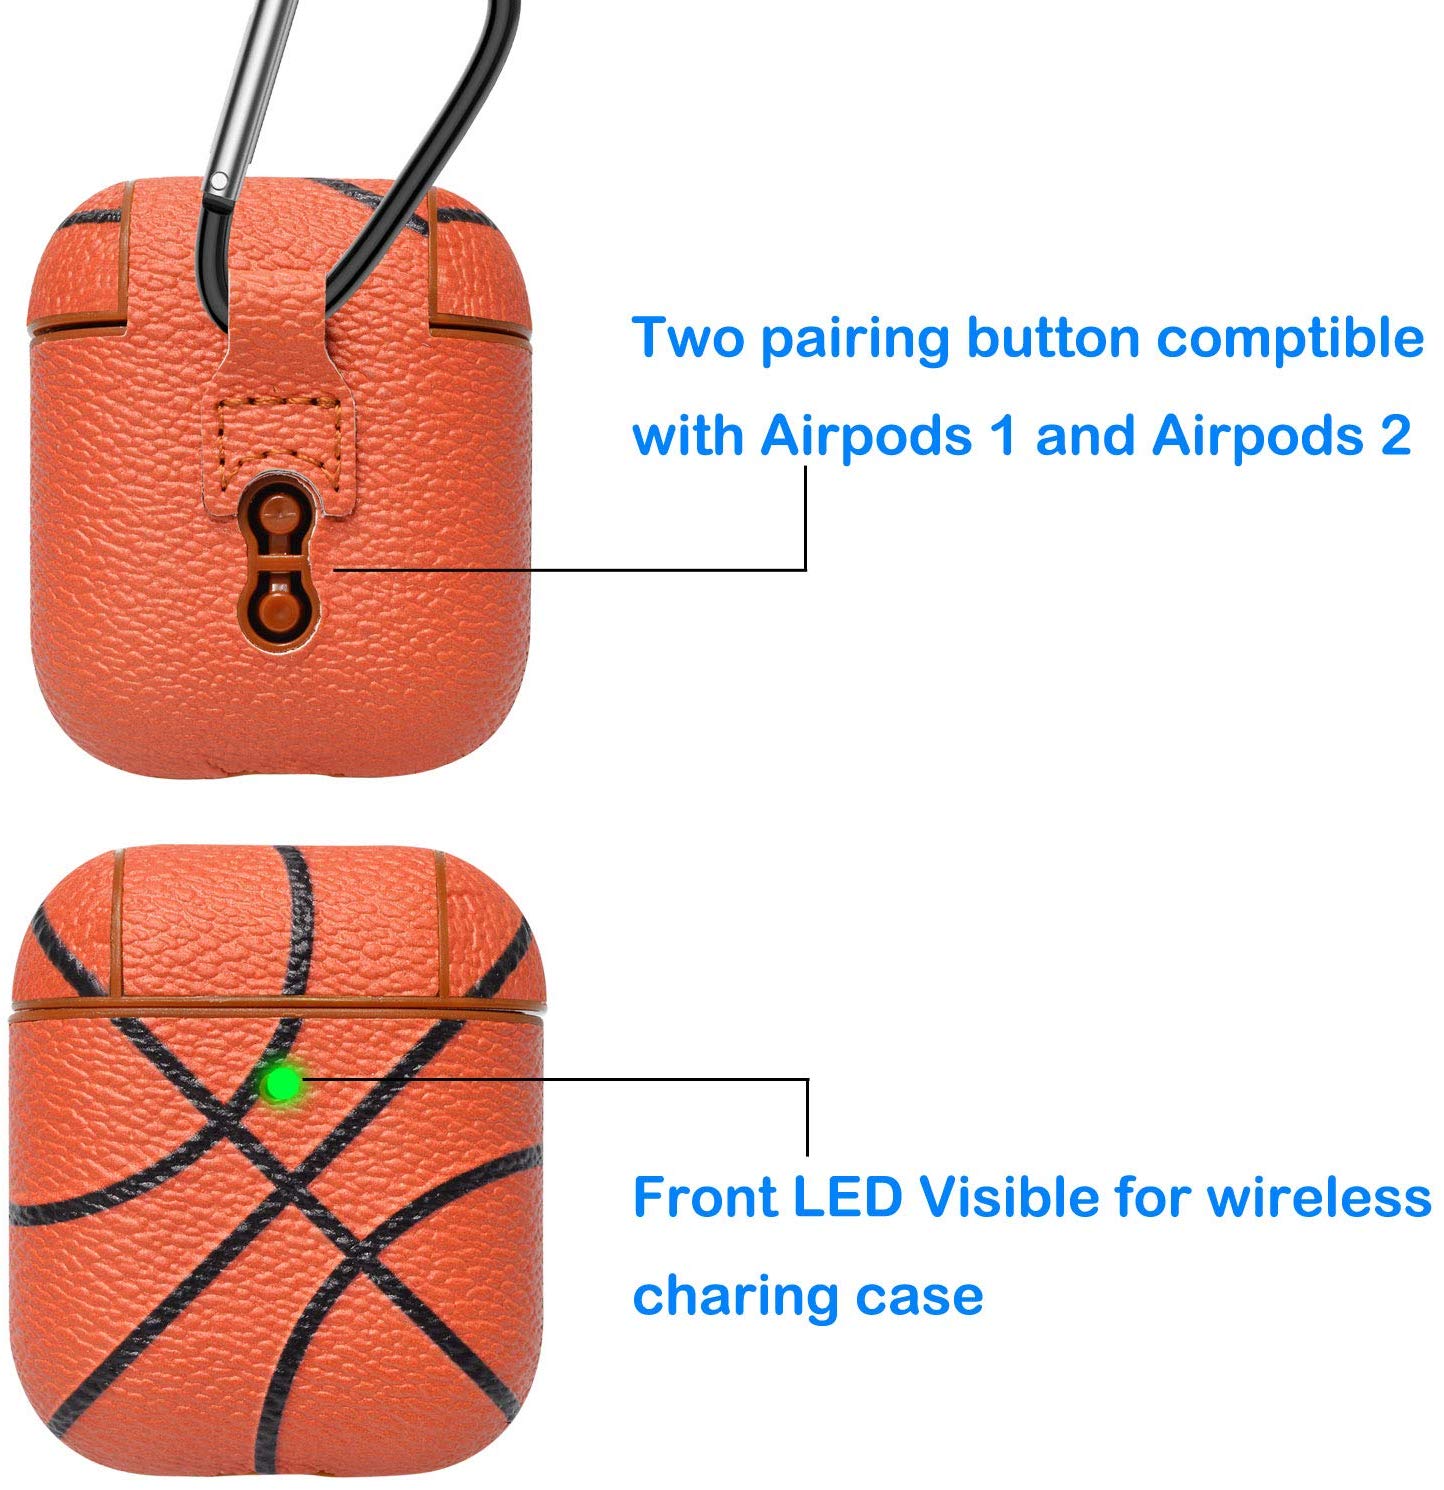 Apple Airpods Case Skin, Takfox AirPods Accessories Case for Airpods 1 & 2 Portable Protective Anti-Scratch PU Leather Cover Skin for Airpods 1 & AirPods 2 [Front LED Visible] w/ Keychain -Basketball - image 3 of 9